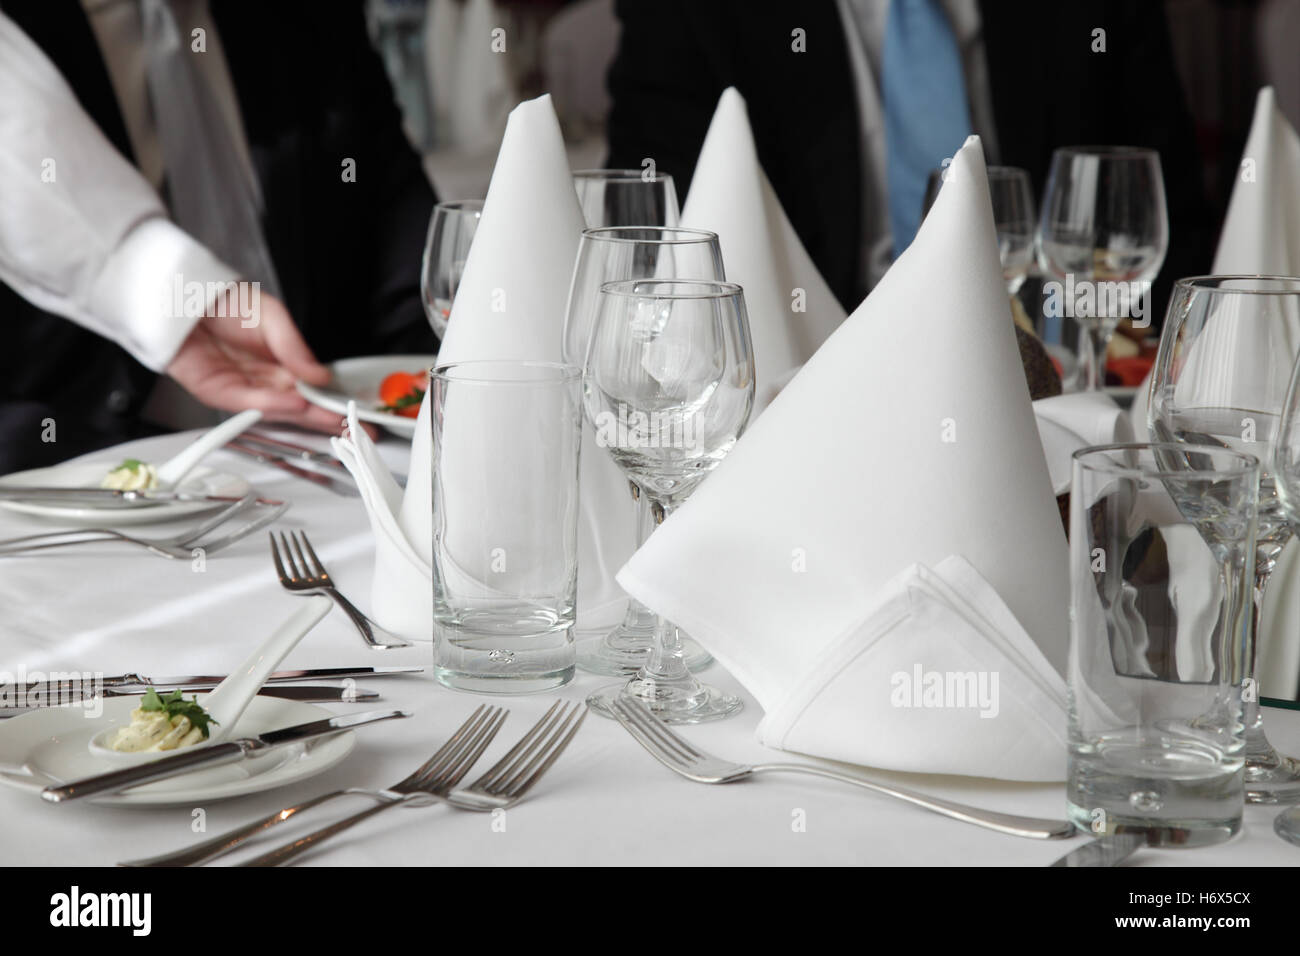 Close-up of the hand of a waiter, serving on elegantly set table with two dressed-up persons. Stock Photo